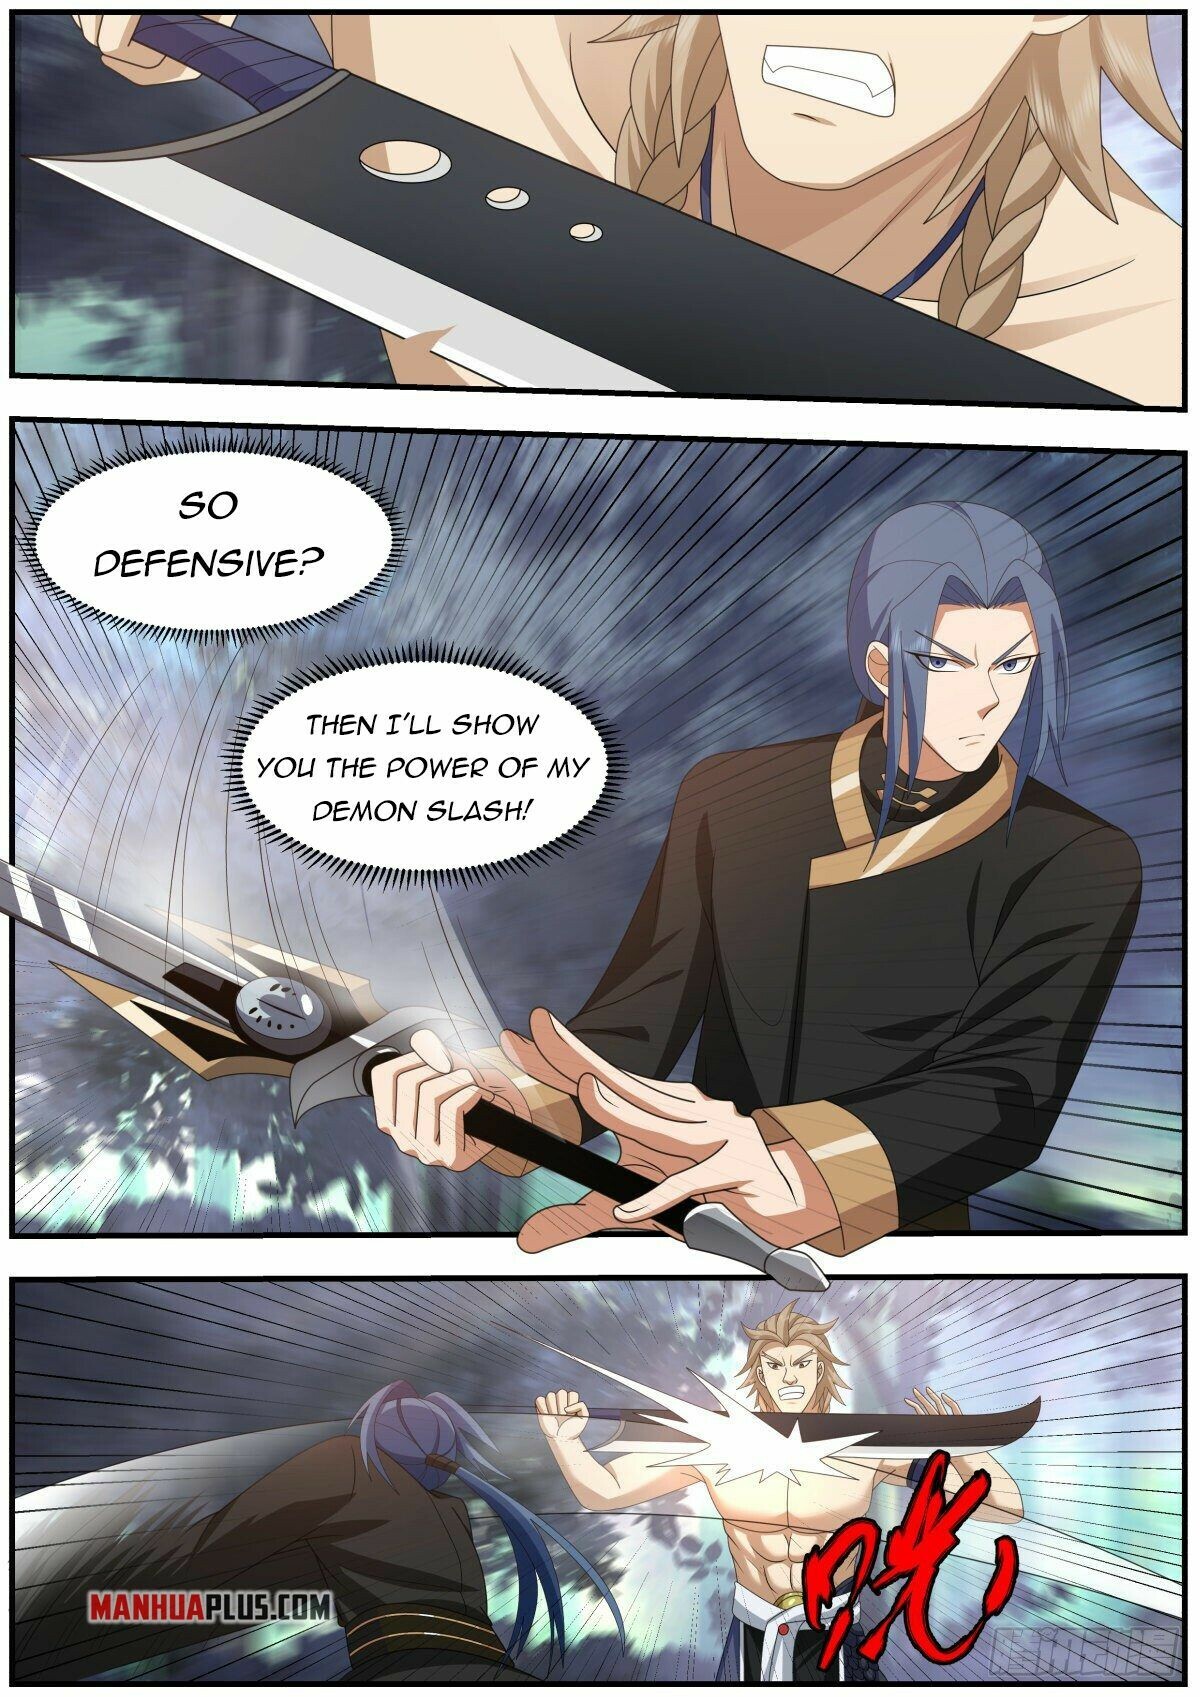 Killing Evolution From A Sword - Page 4